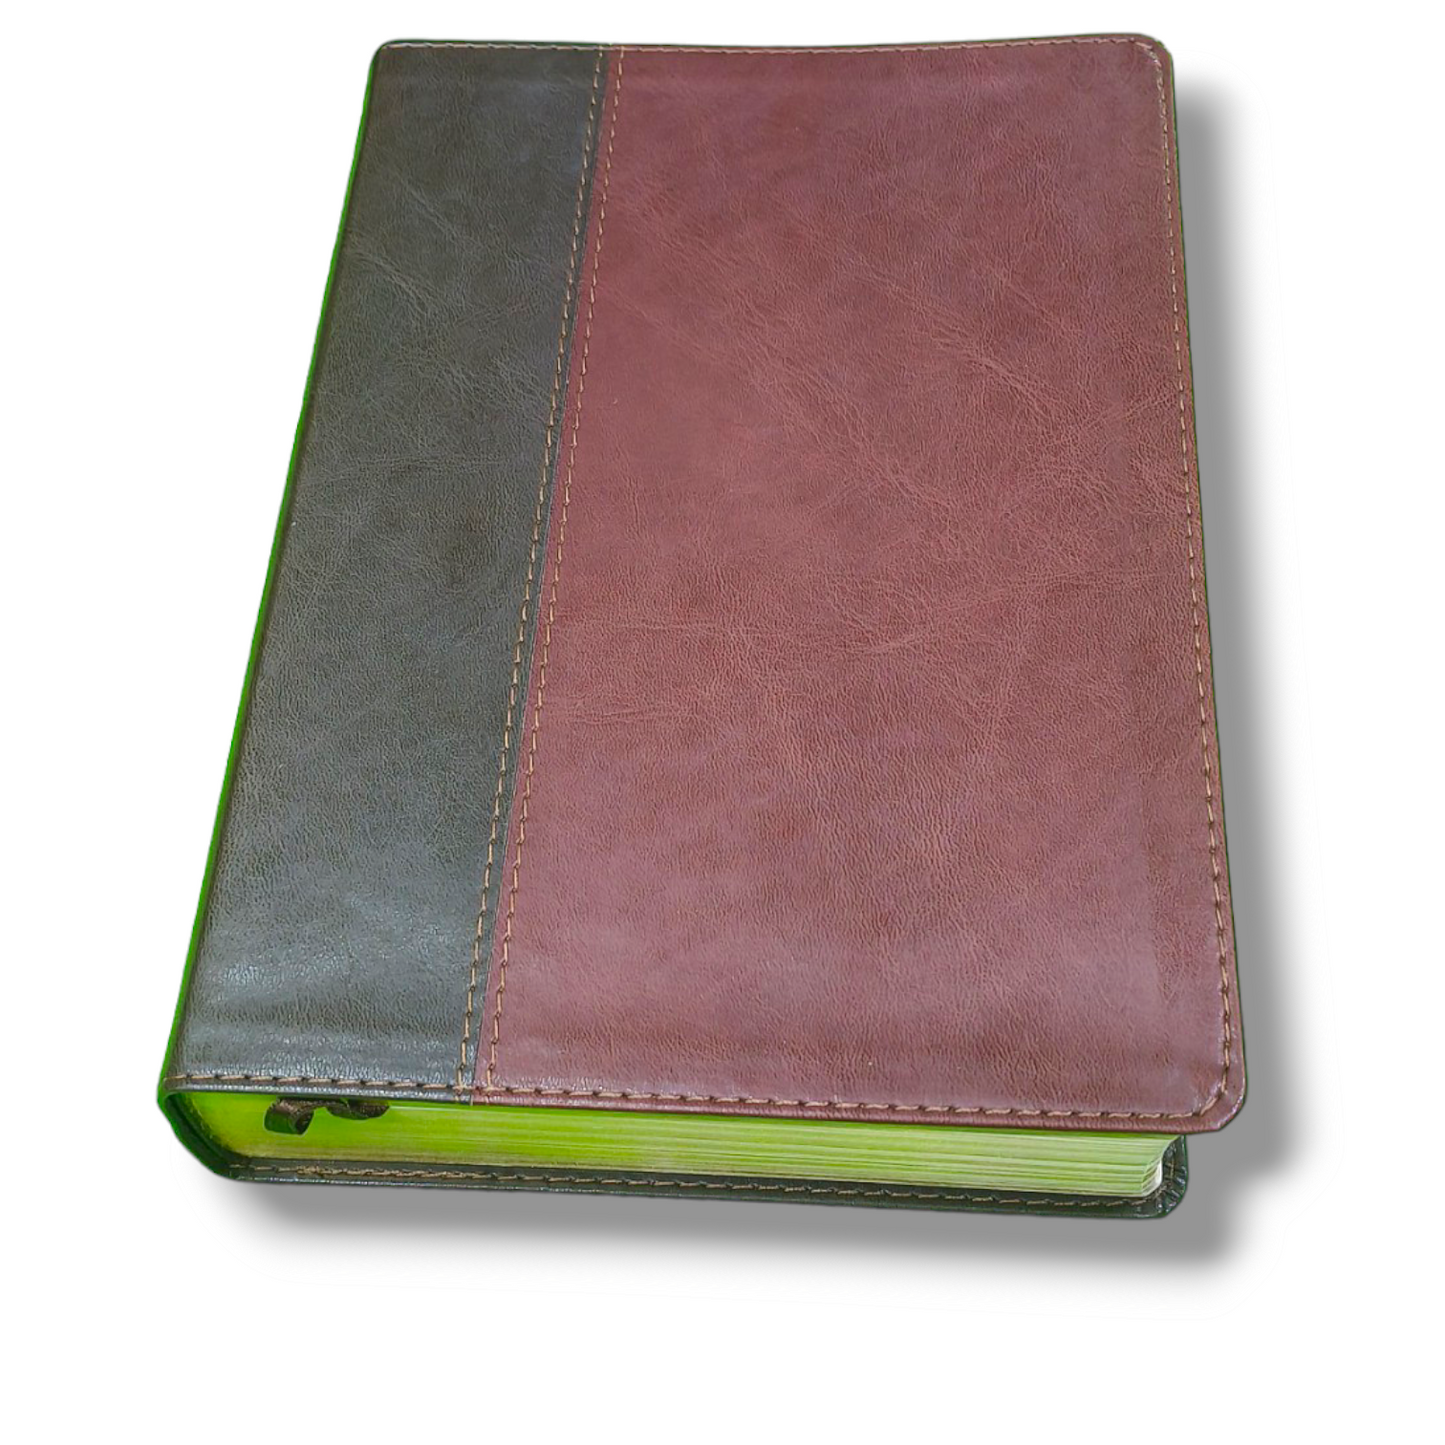 NIV Life Application Study Bible | Third Edition Soft Leather-Look Brown Edition | New Edition